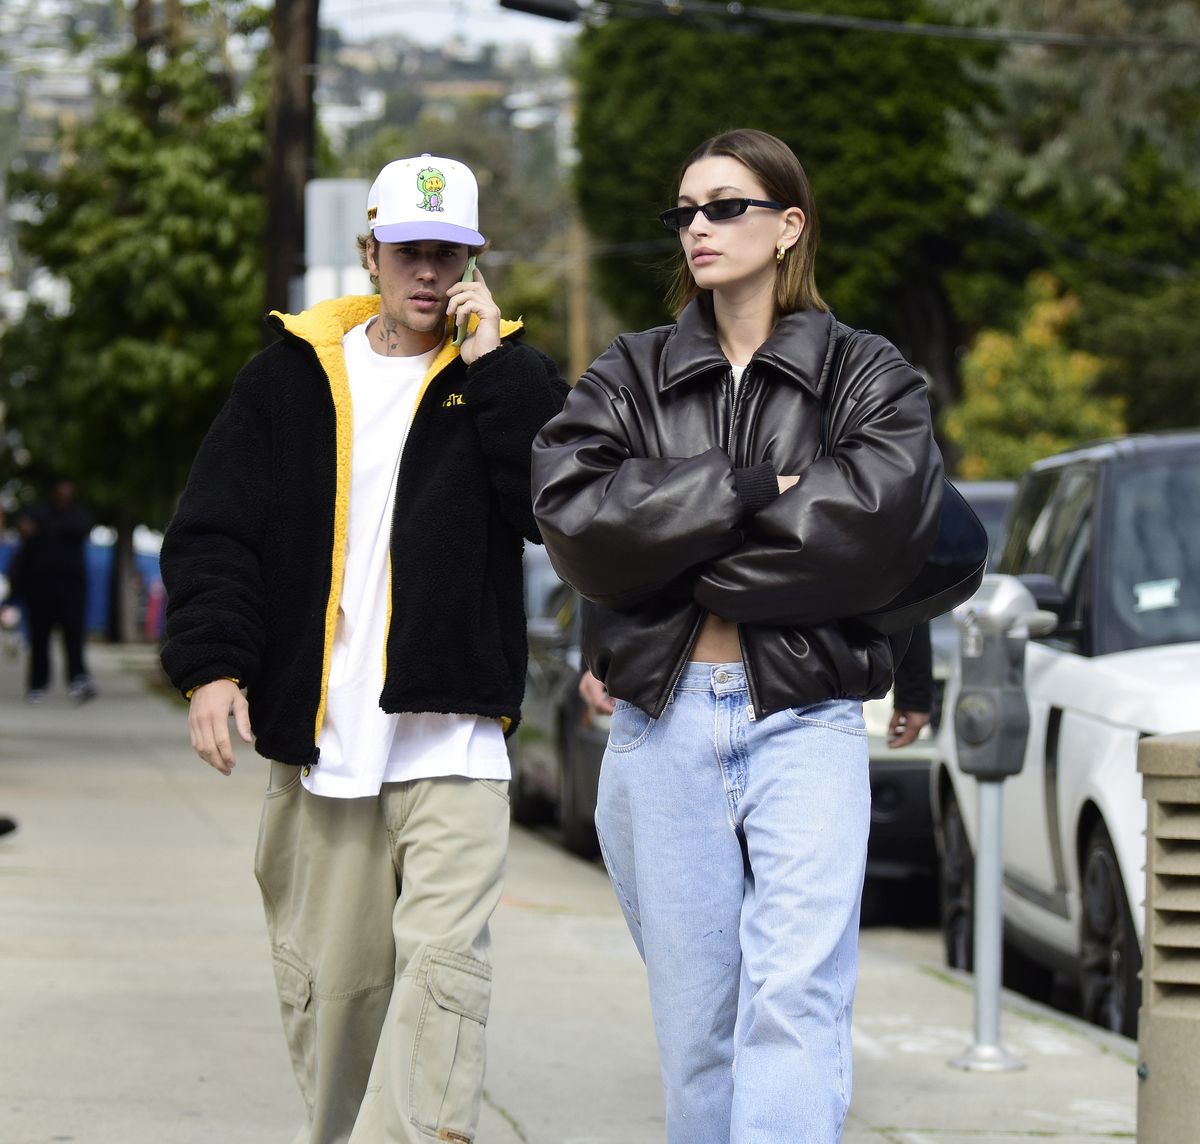 west hollywood, ca february 3 justin bieber and hailey bieber are seen on february 3, 2023 in west hollywood, california photo by megagc images